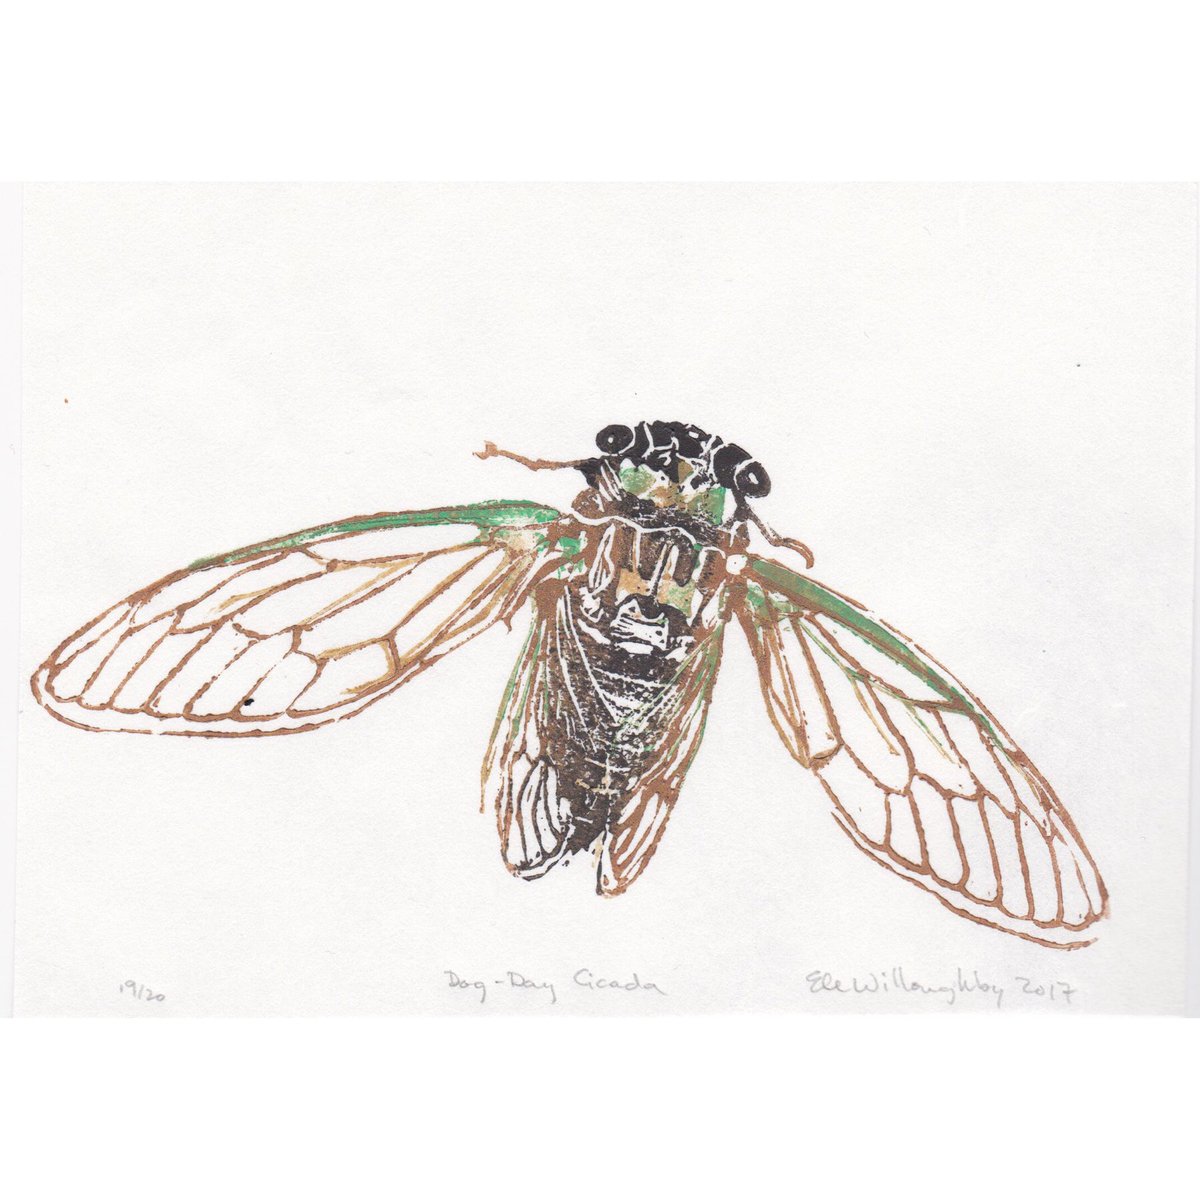 The cicada gives us the sound of summer #FolkloreSunday - there are thousands of species worldwide with rich lore. The dog-day cicada is named for the dog days of summer in July/August when Sirius in Canis Major (the Big Dog) is prominent in the sky. Though we associate their…